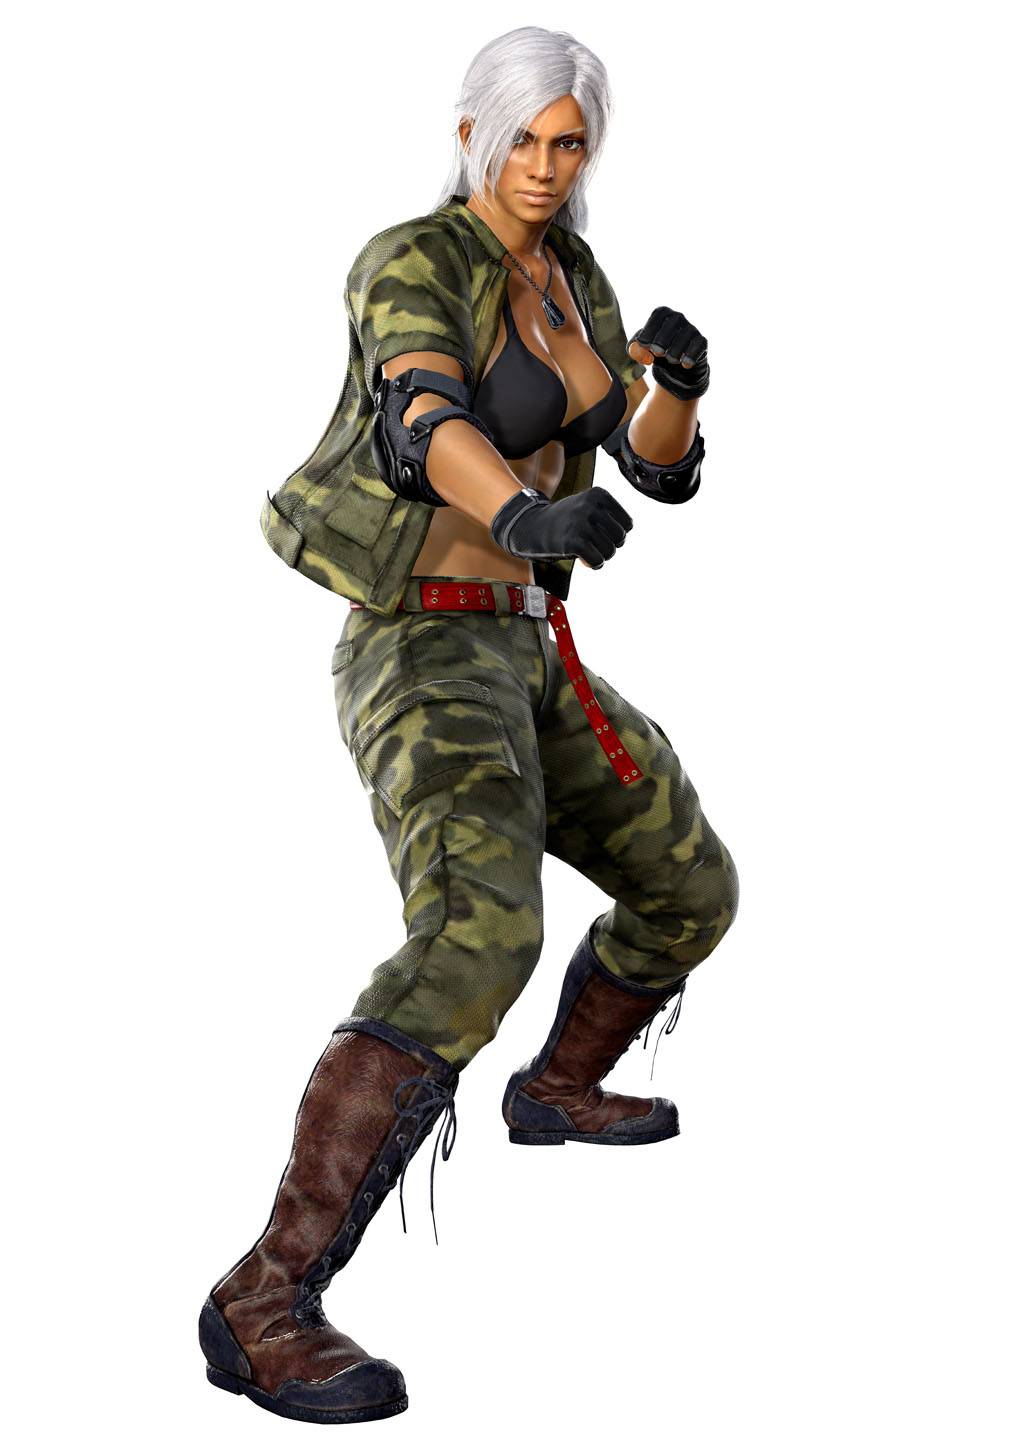 Virtua Fighter 5 Ultimate Showdown Image - ID: 452174 - Image Abyss.